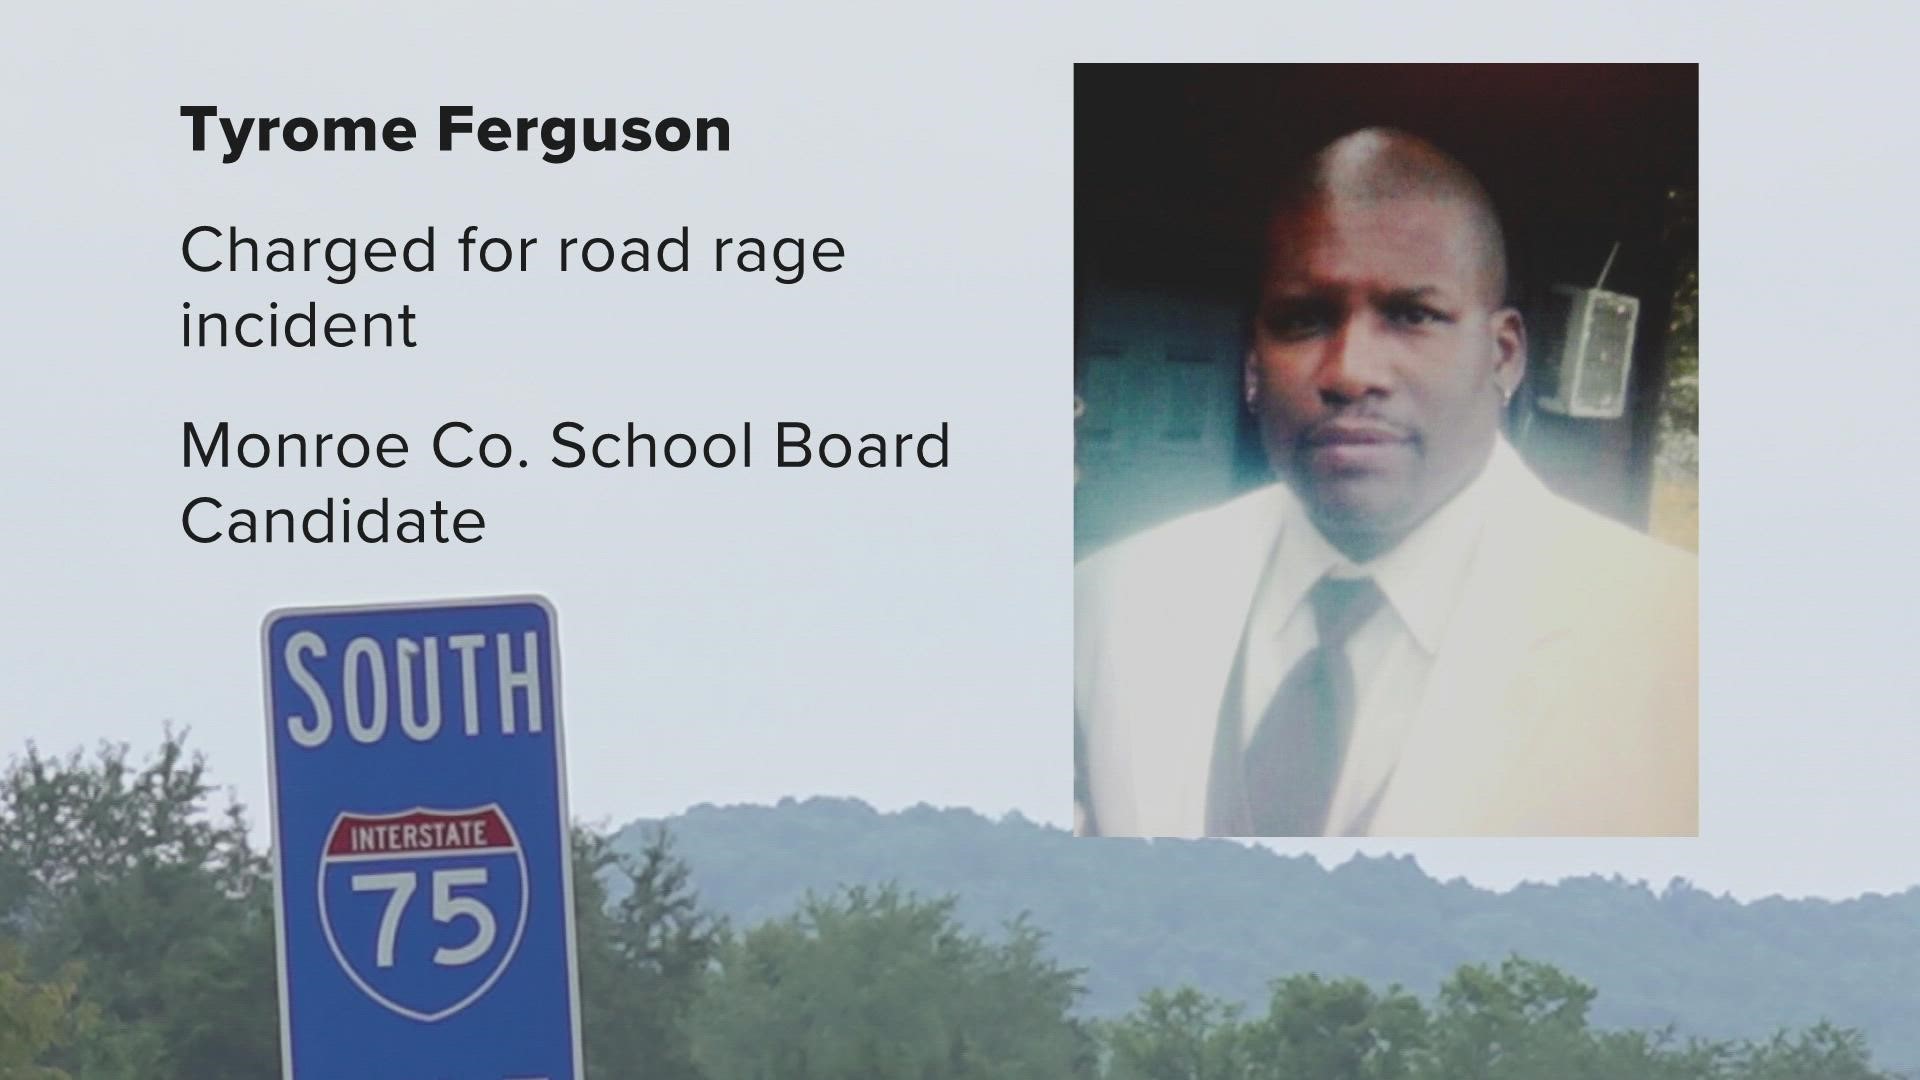 Police say Tyrome Ferguson was driving on I-75 when he fired three rounds into another car.